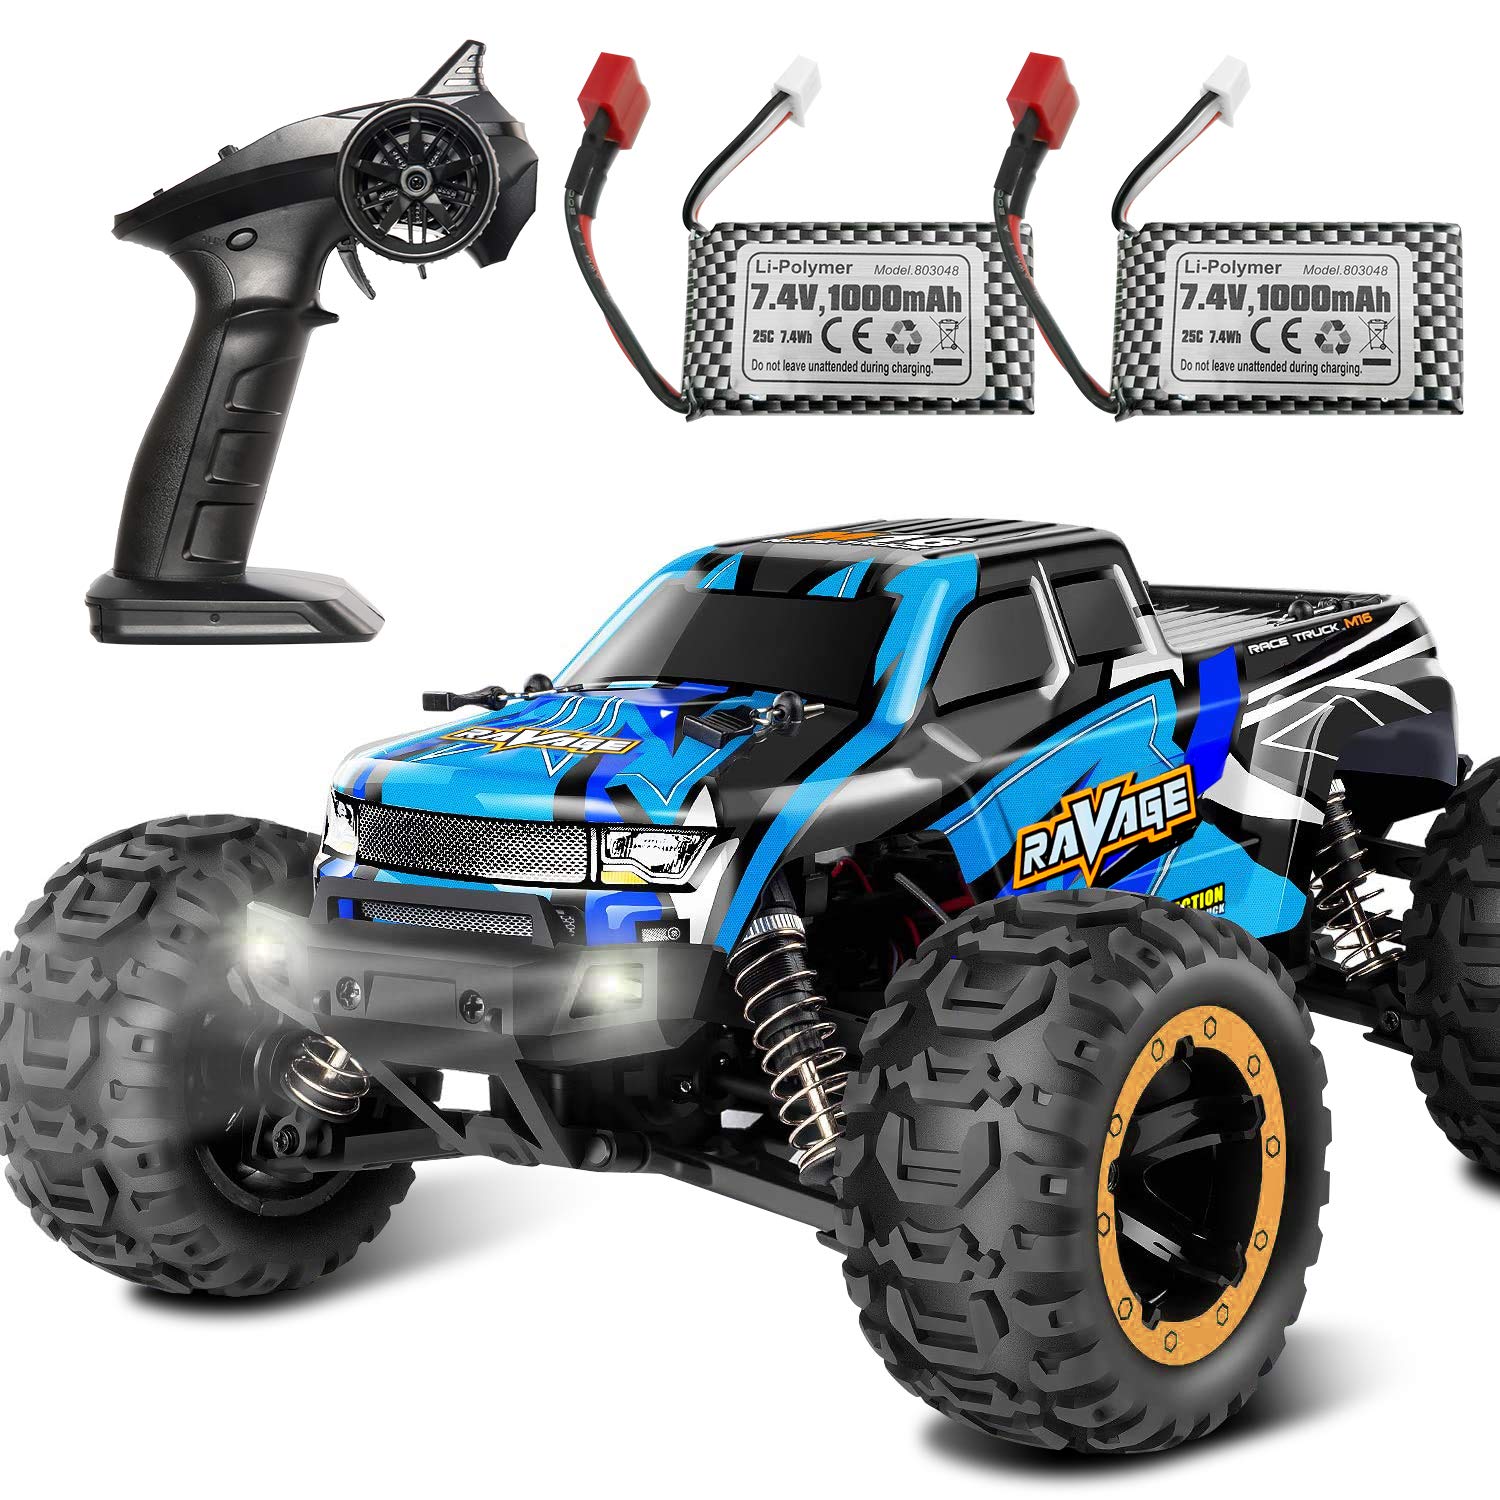 Can Big RC Cars From Amazon Beat The Competition: 10 Reasons Why Remote Control Cars Dominate